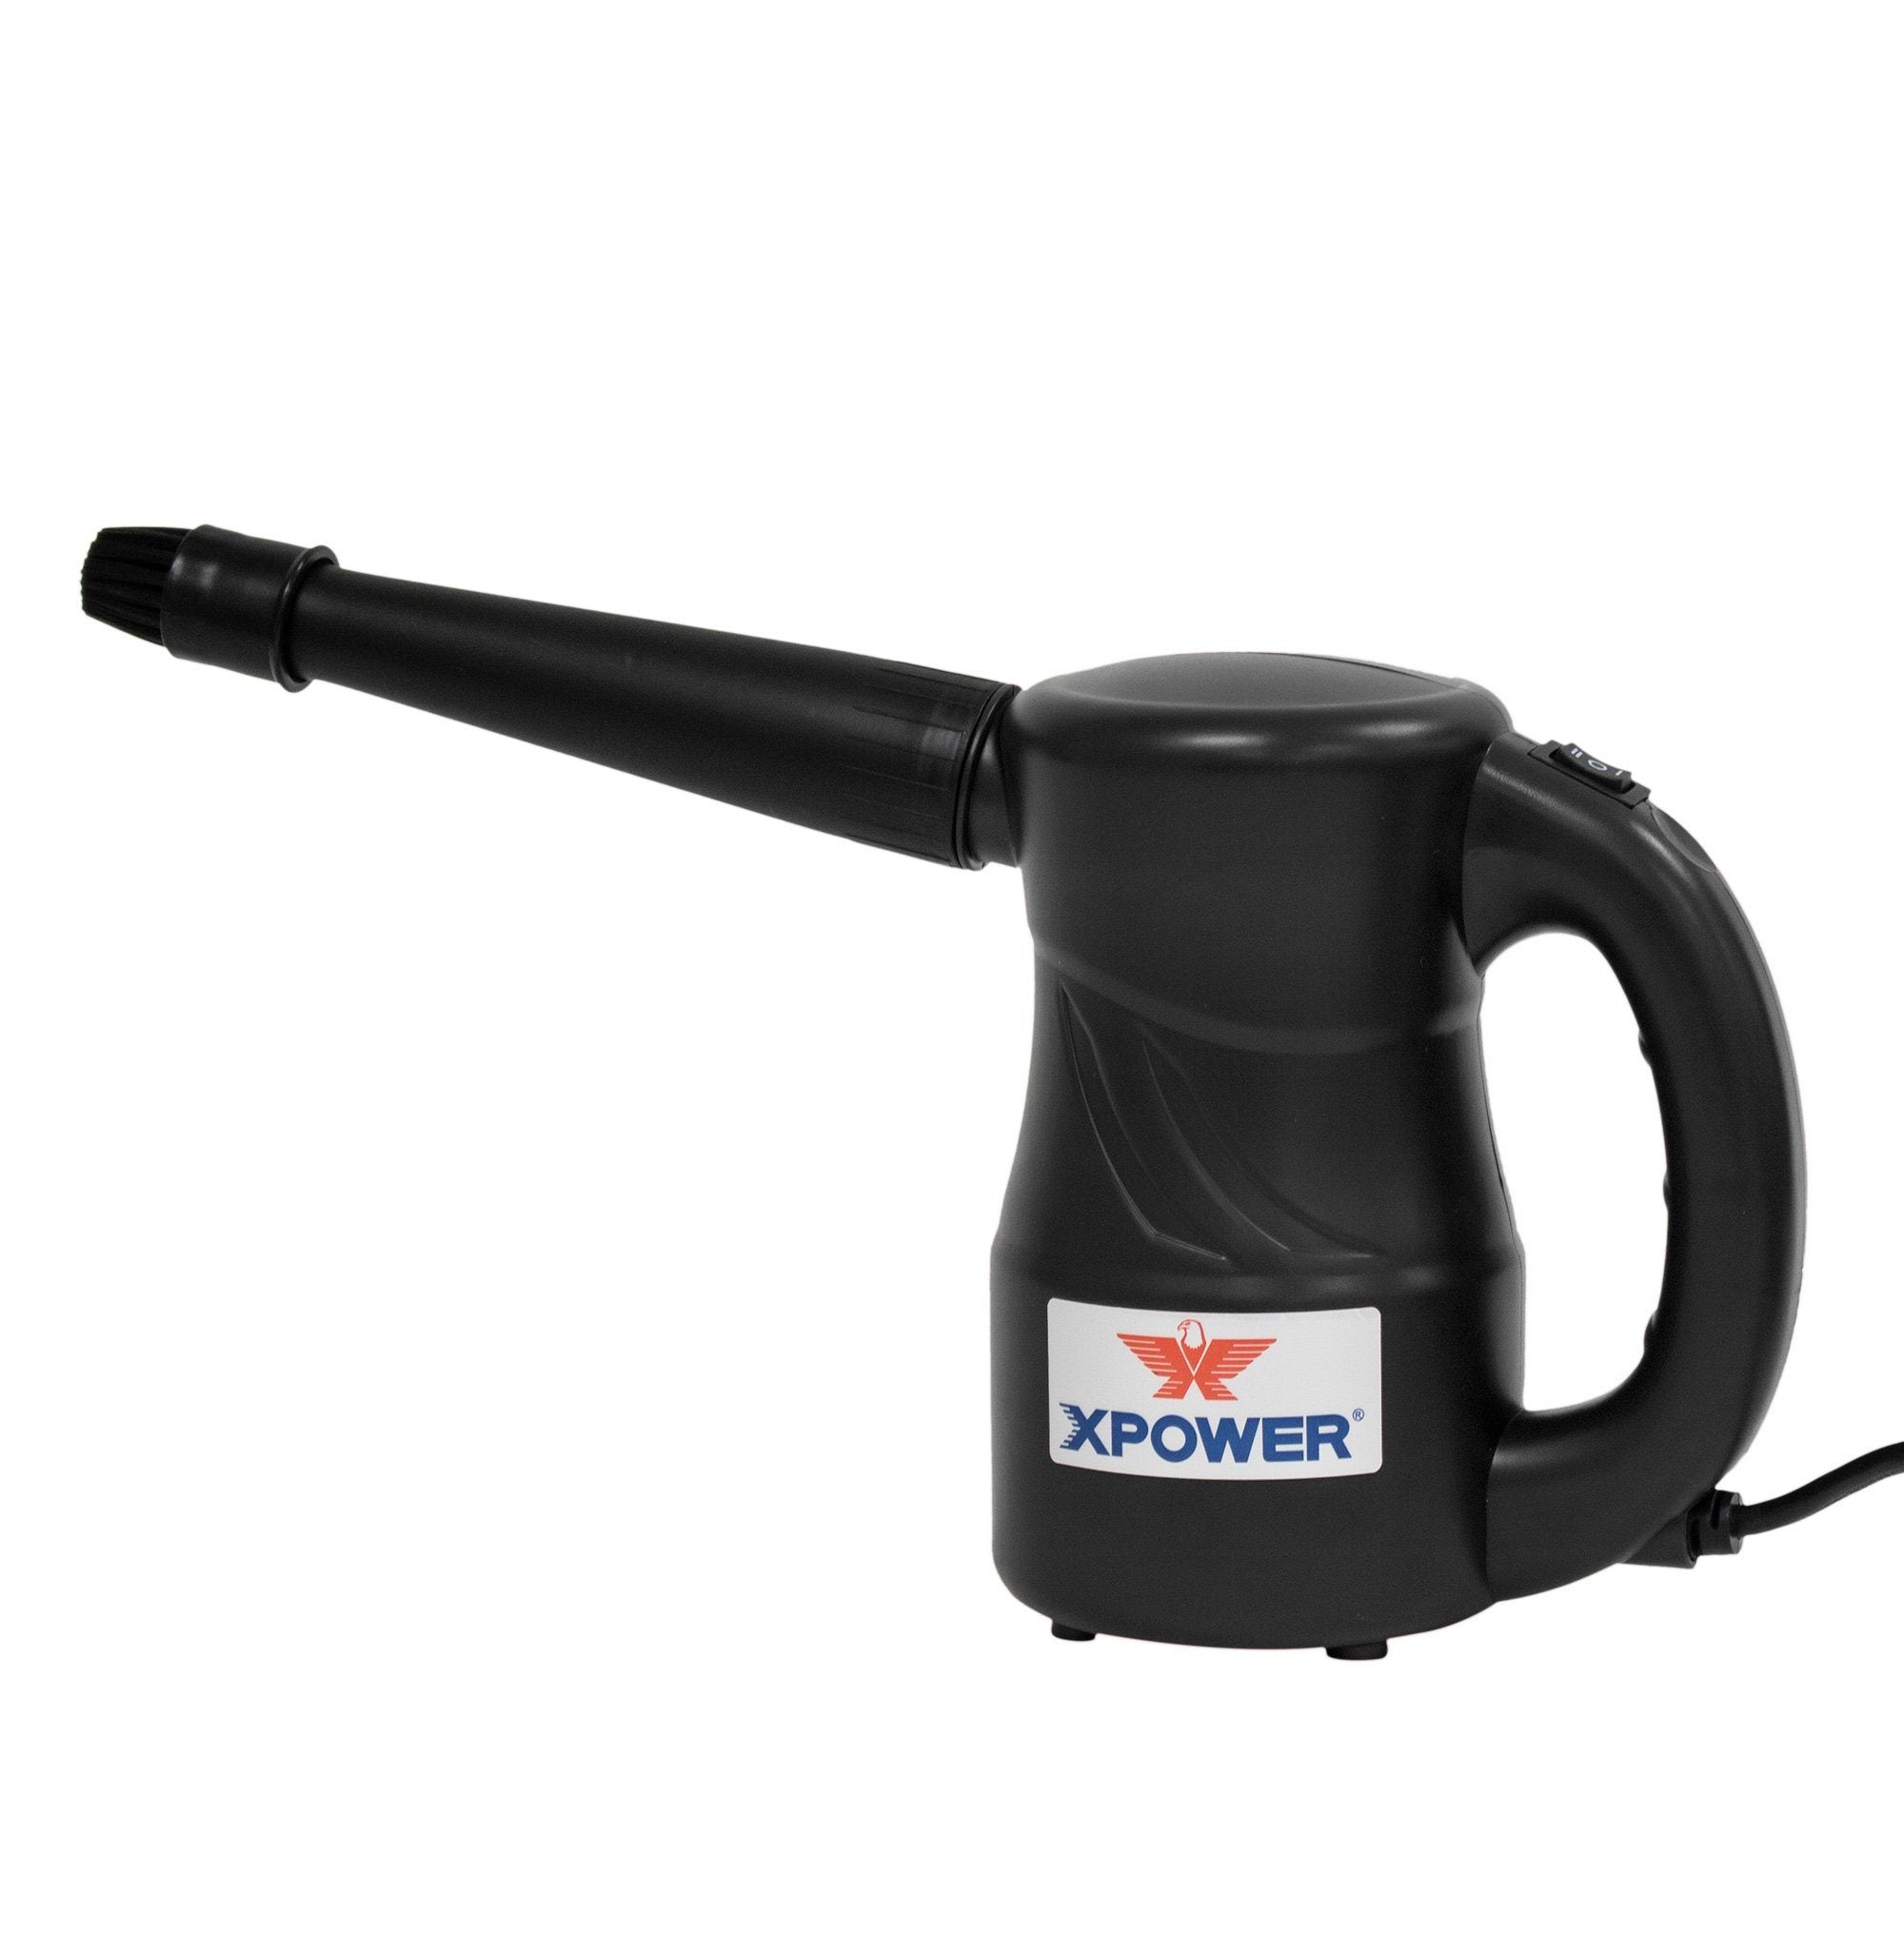 XPOWER A-2S Cyber Duster Multipurpose Electric Duster, Blower-Dryers-Pet's Choice Supply